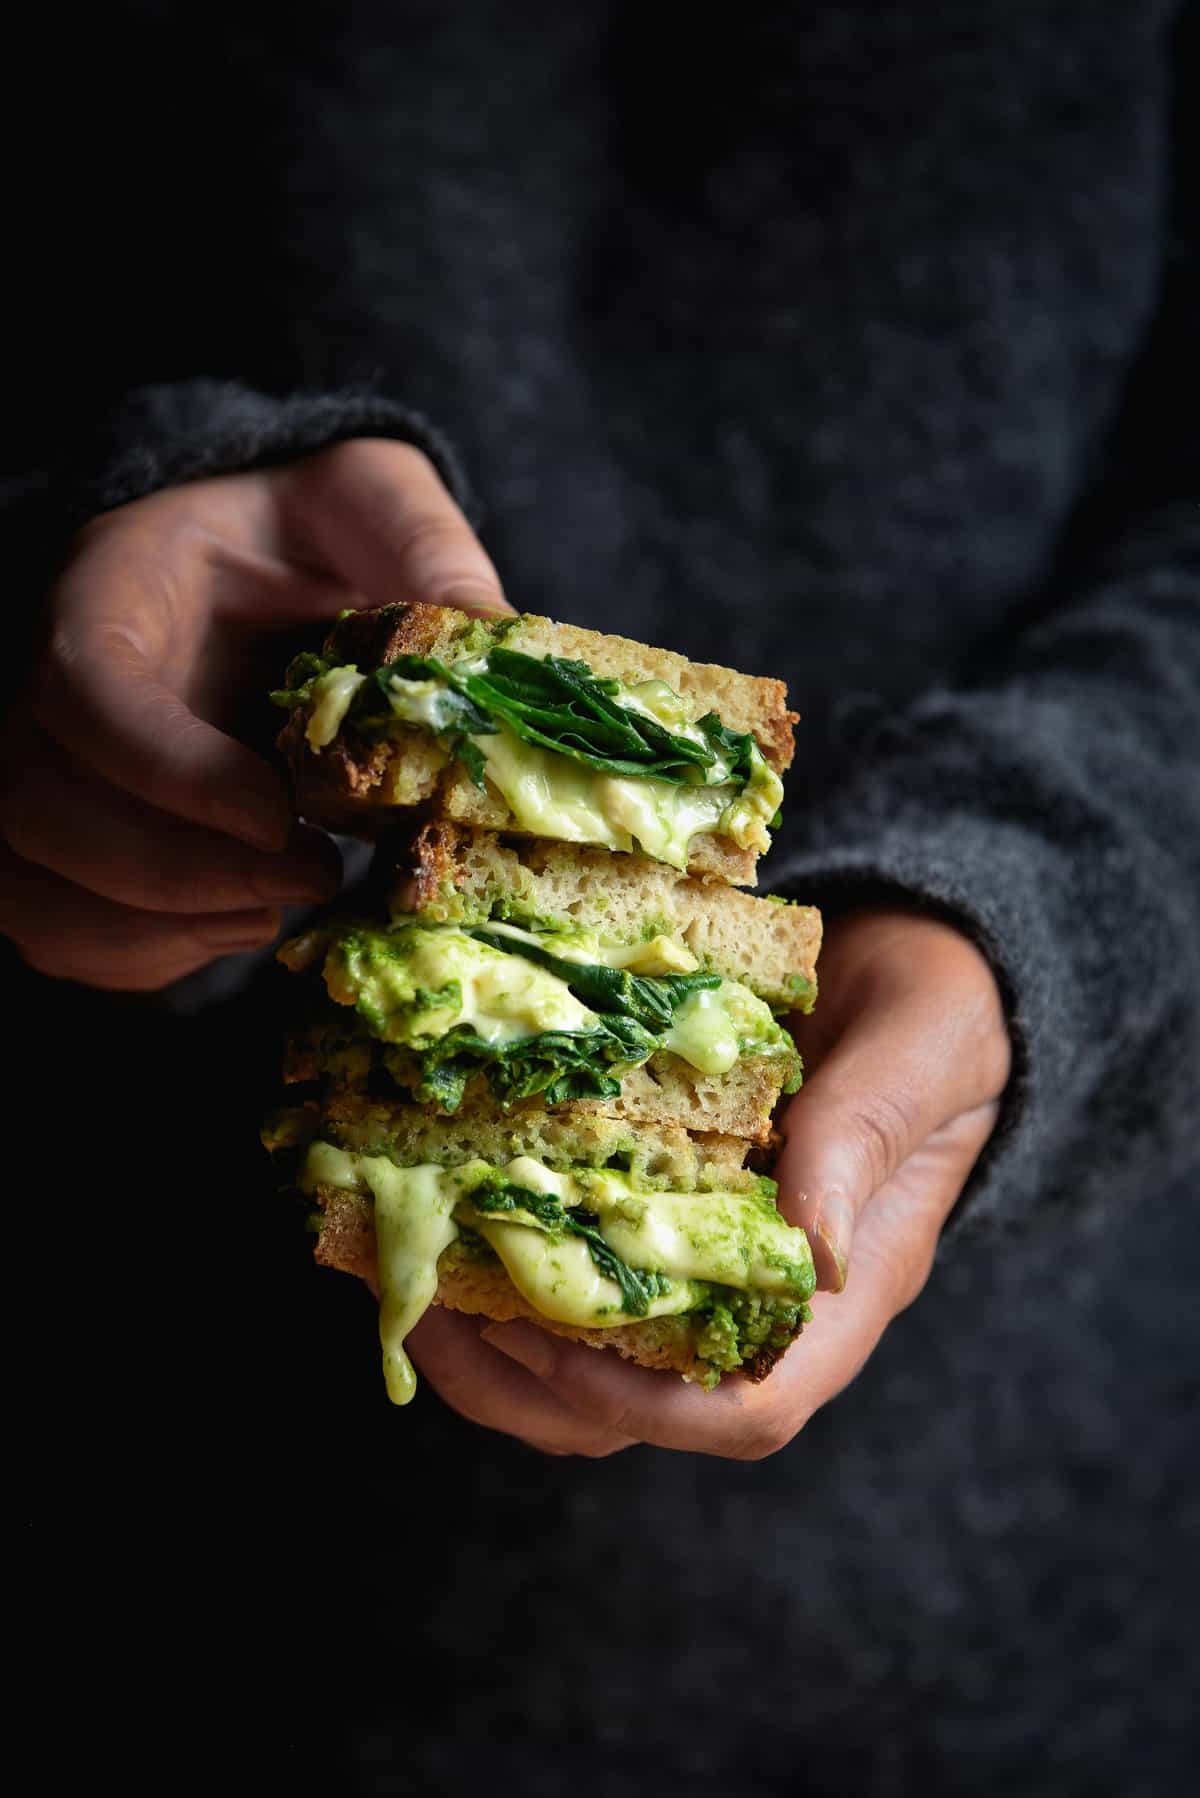 A stack of gluten free green toasties filled with D'Affinois cheese held by a person in a dark grey fluffy jumper. The image is part of a series on Vegetarian cheese in Australia.